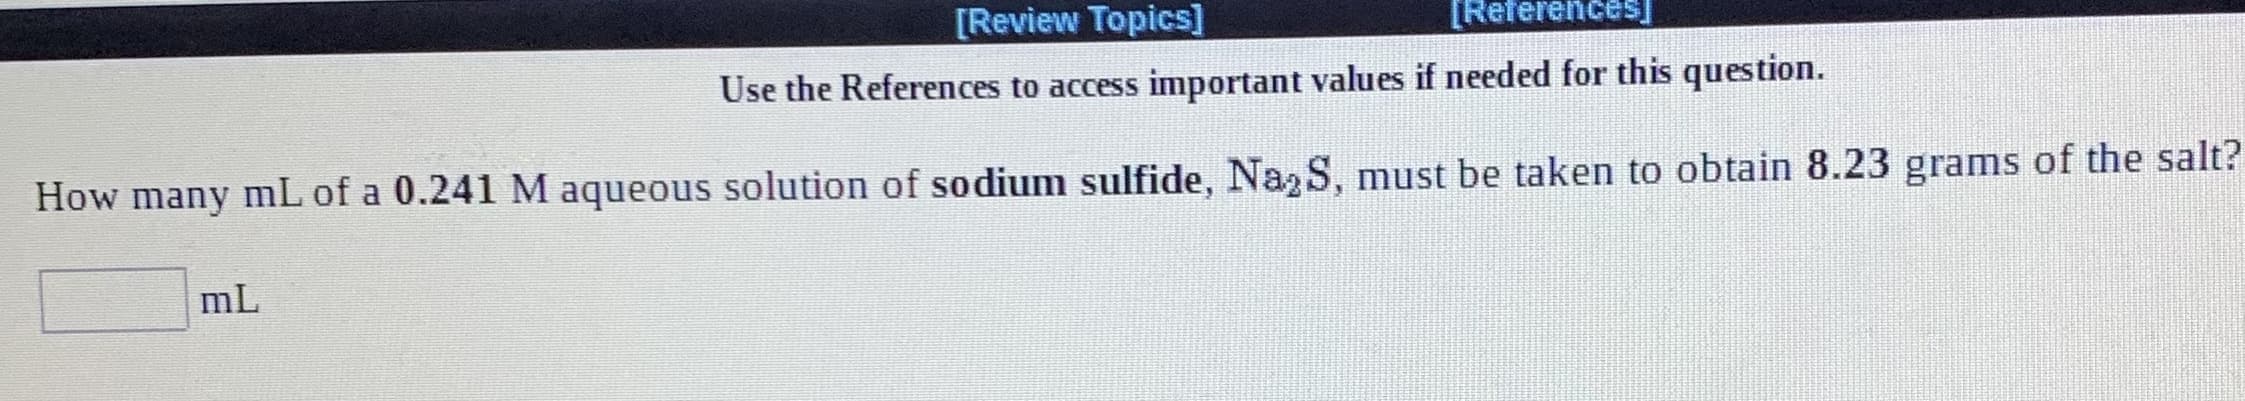 [Review Topics]
[Referencesj
Use the References to access important values if needed for this question.
How many mL of a 0.241 M aqueous solution of sodium sulfide, Na,S, must be taken to obtain 8.23 grams of the salt?
mL
